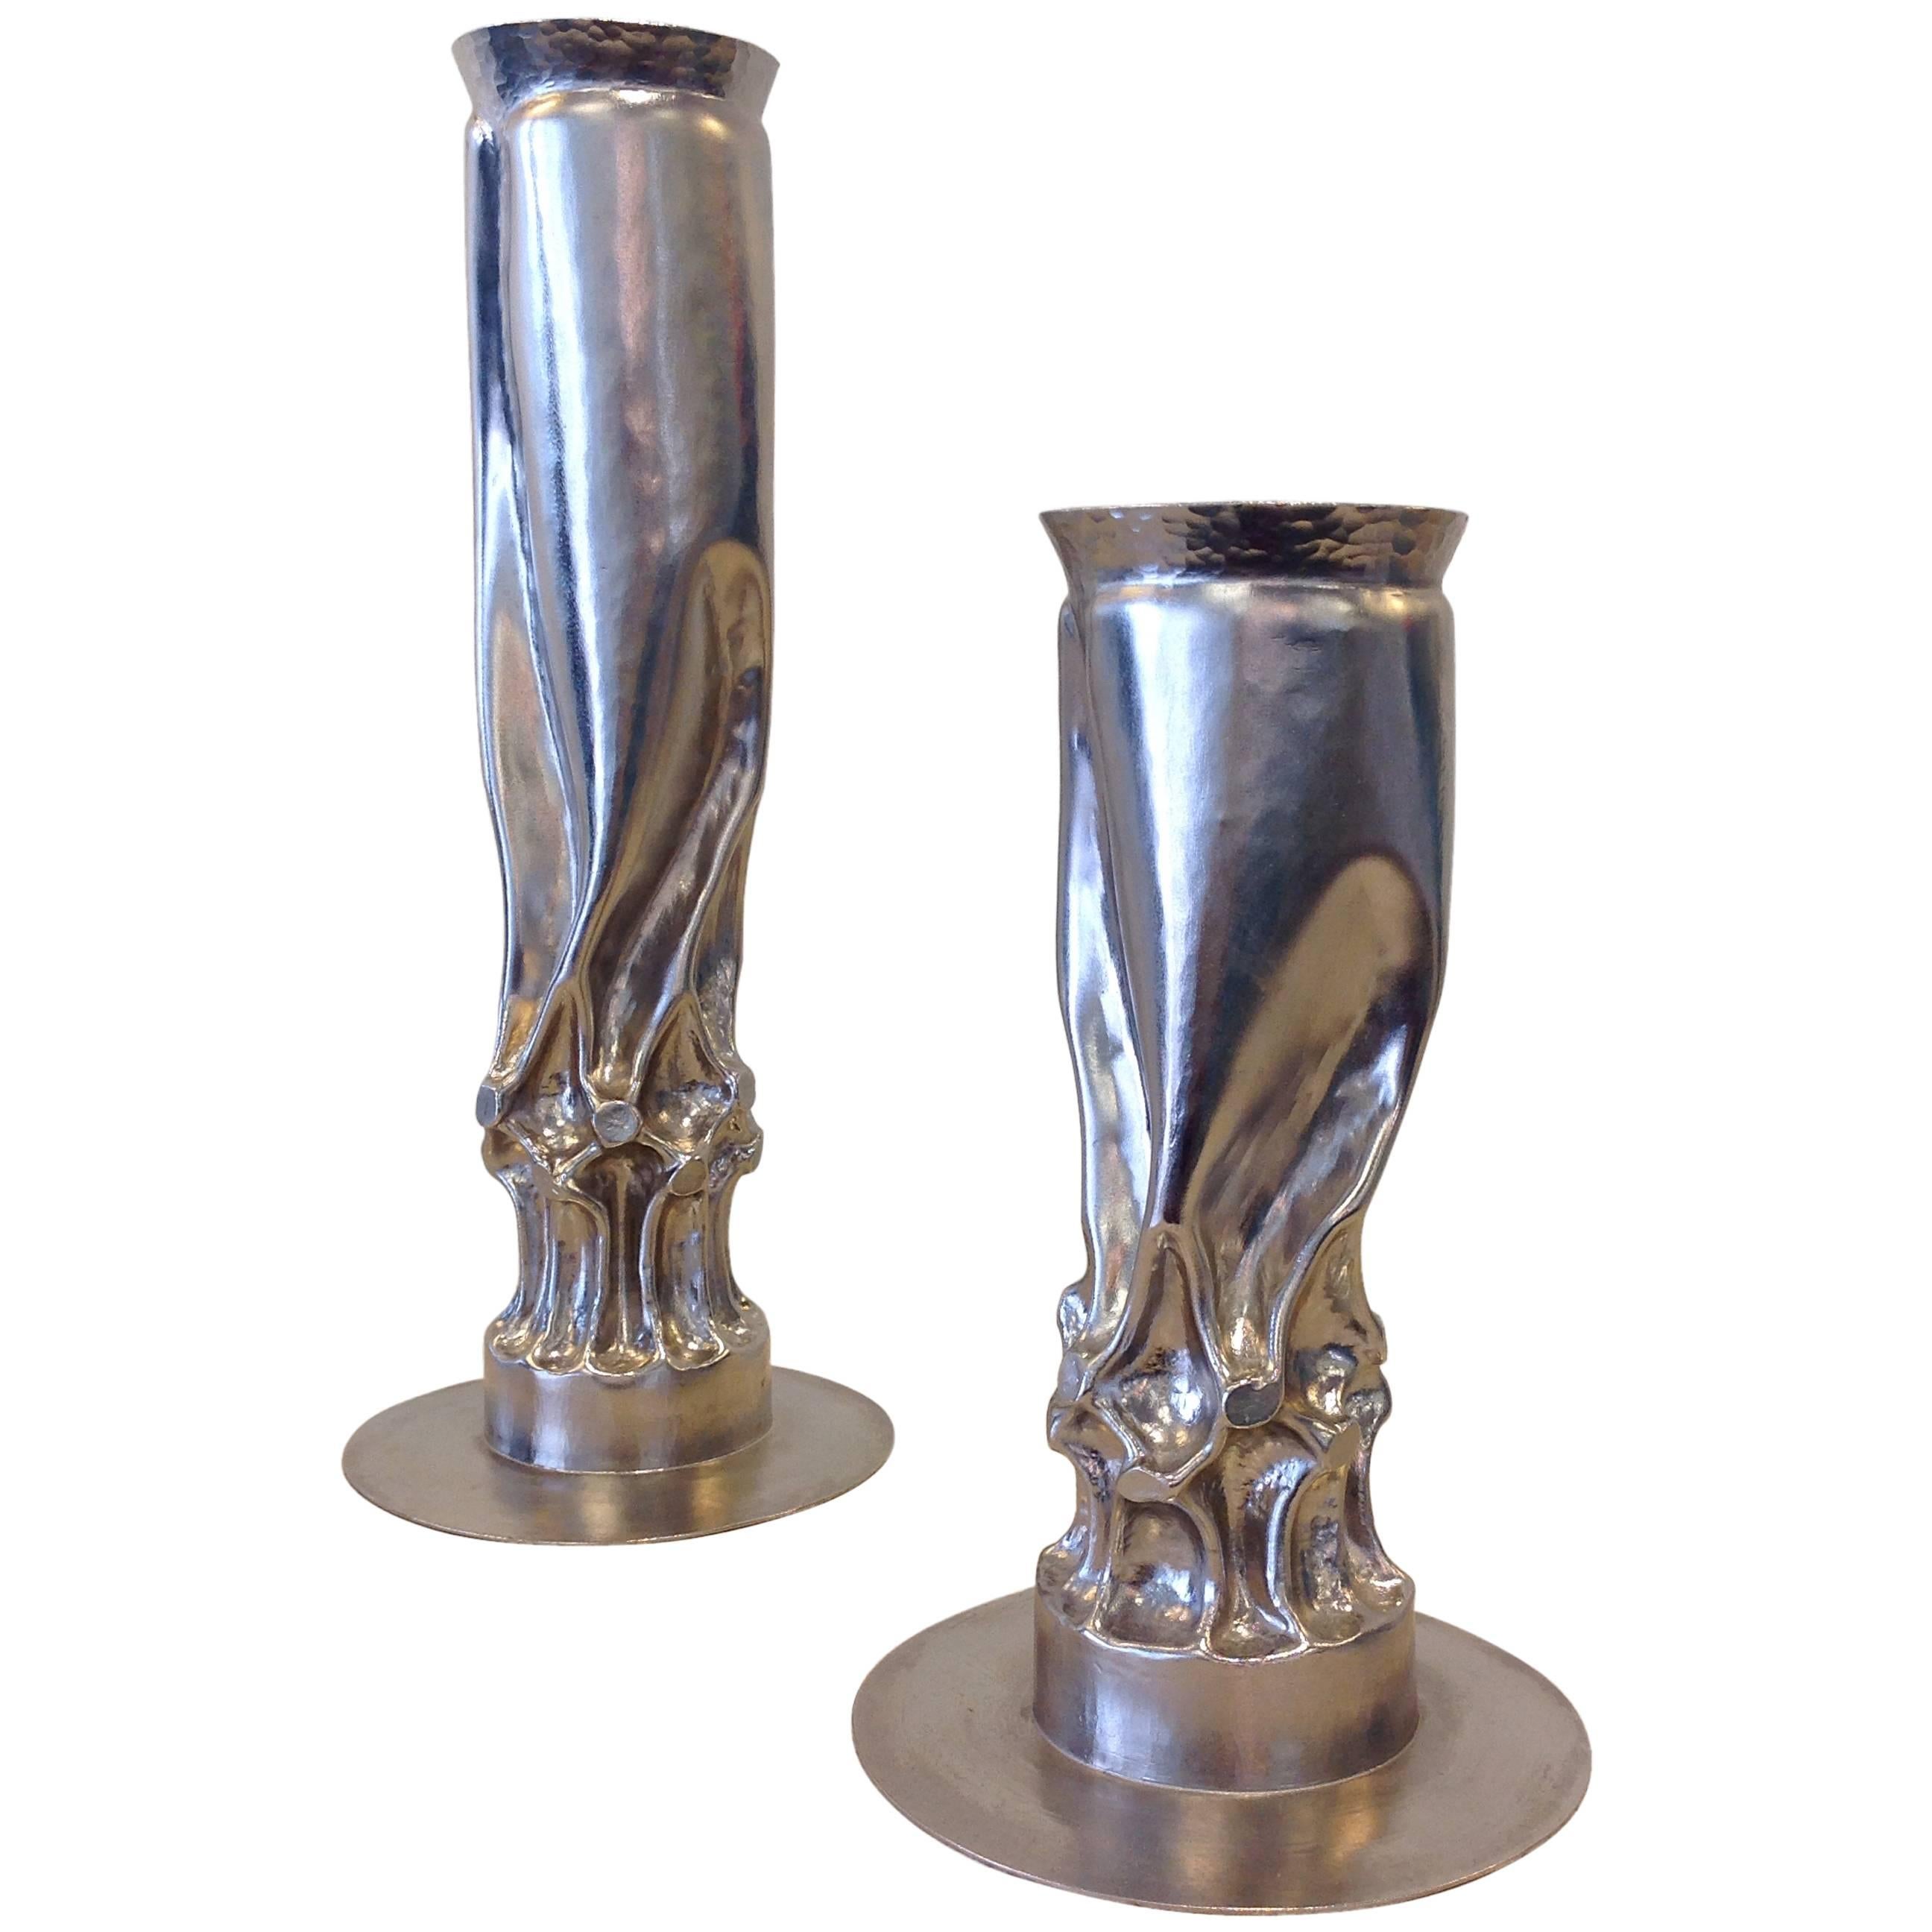 Pair of Brutalist Nickel Candle Holders by Thomas Roy Markusen